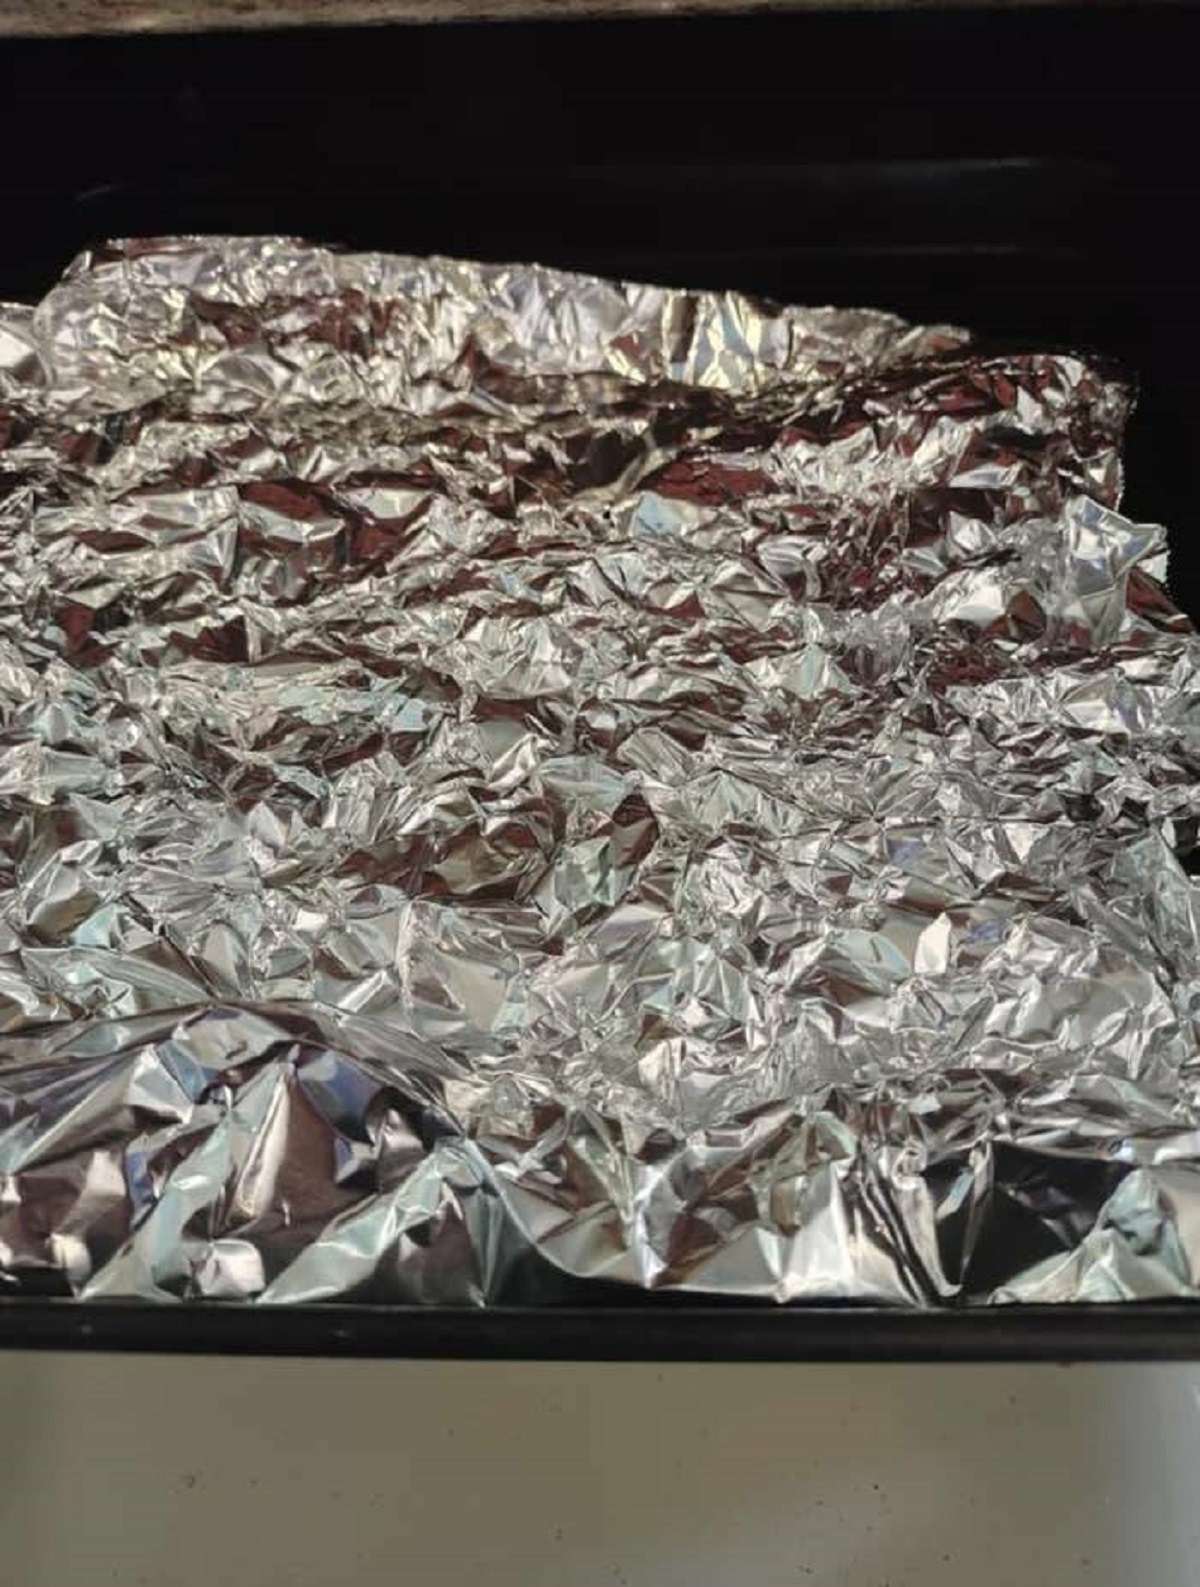 "Crinkle your foil before making chicken nuggets, frozen potatoes, etc. It makes for easy flipping and helps the food to not get stuck. I discovered this by accident/being cheap. Hope it helps somebody out there!"